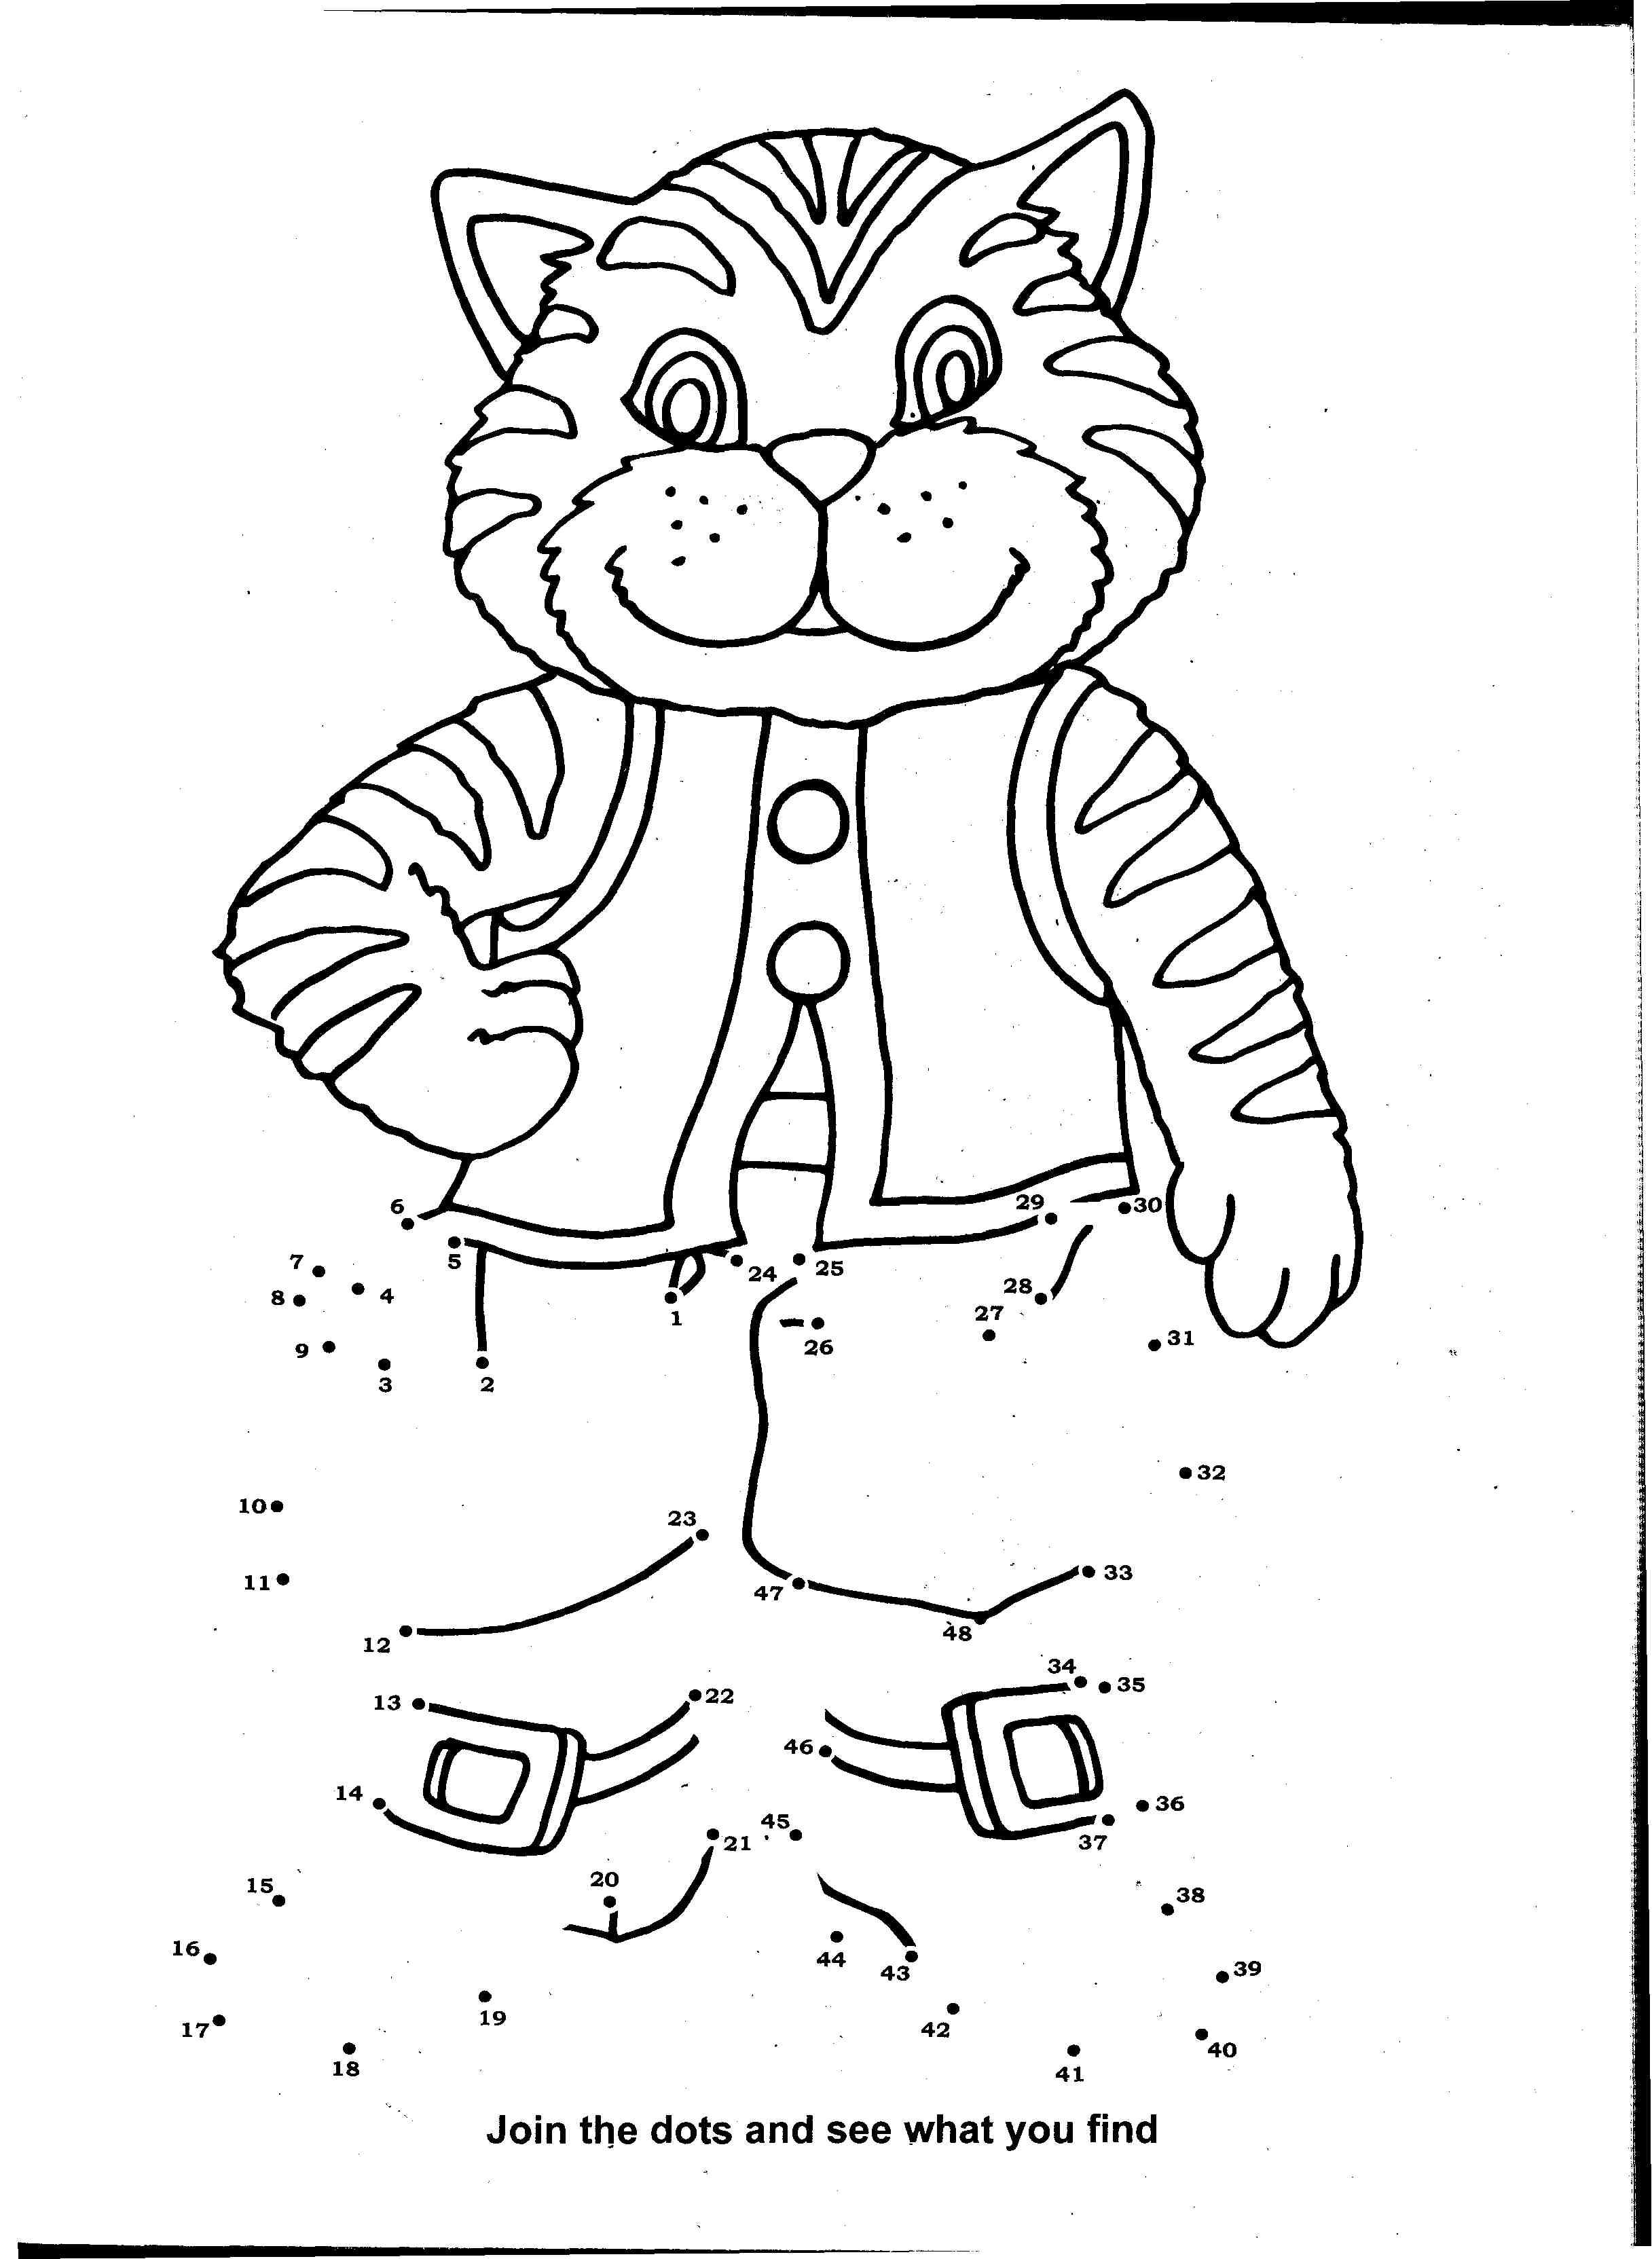  Cat Coloring Pages | Cats Coloring pages |Kitten Coloring pages | Cool cats | #36